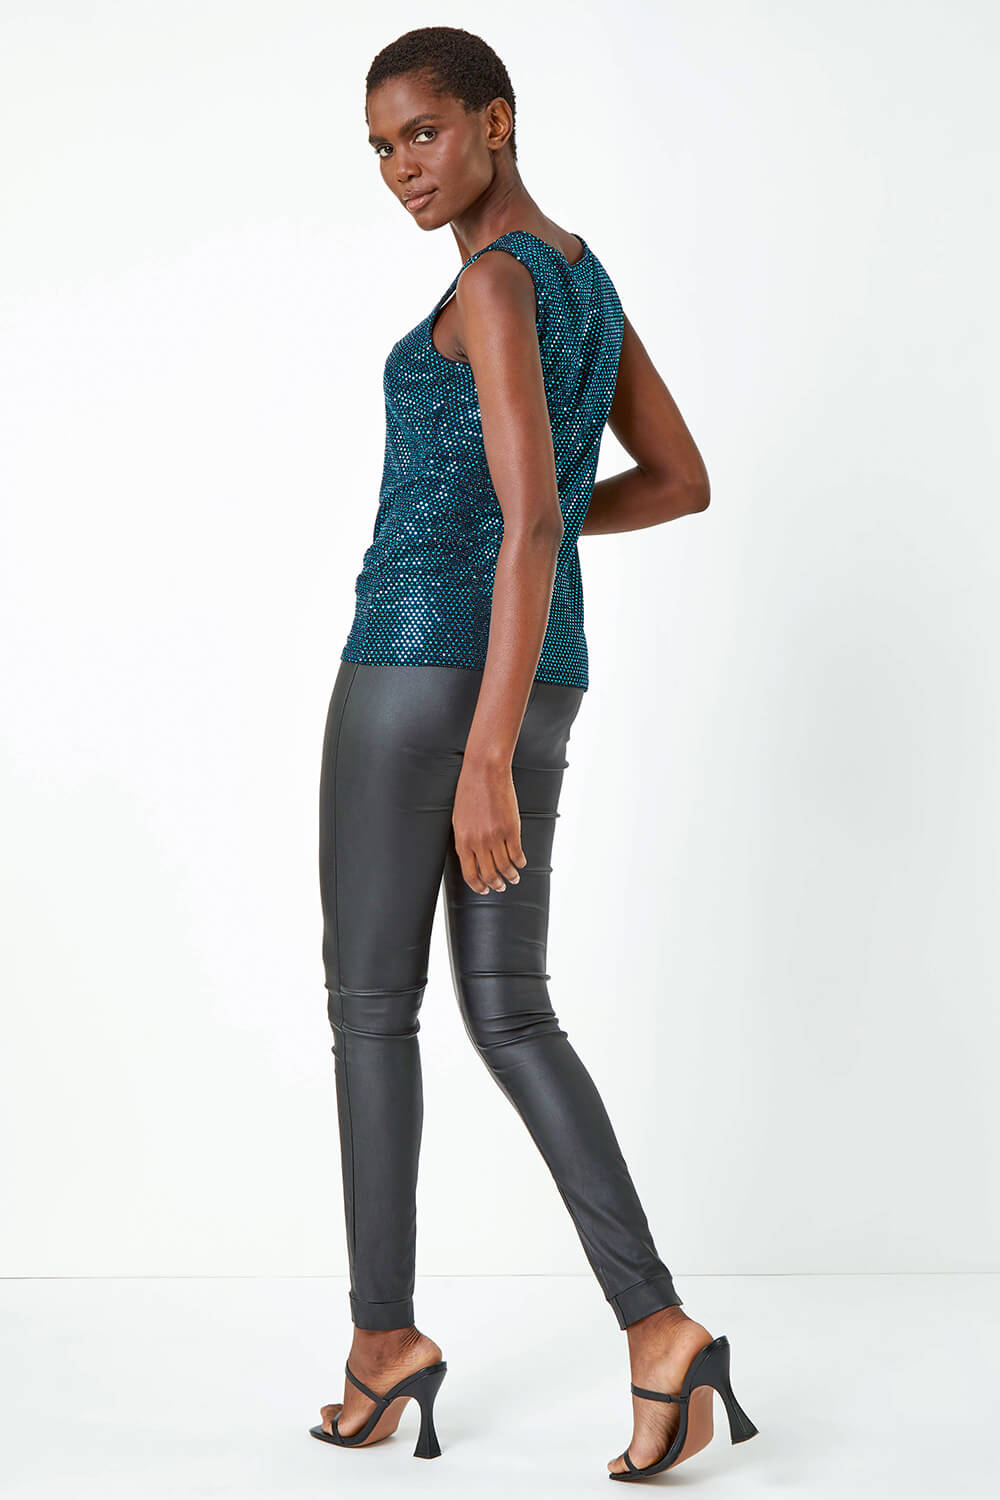 Turquoise Sequin Sparkle Stretch Vest Top, Image 3 of 6